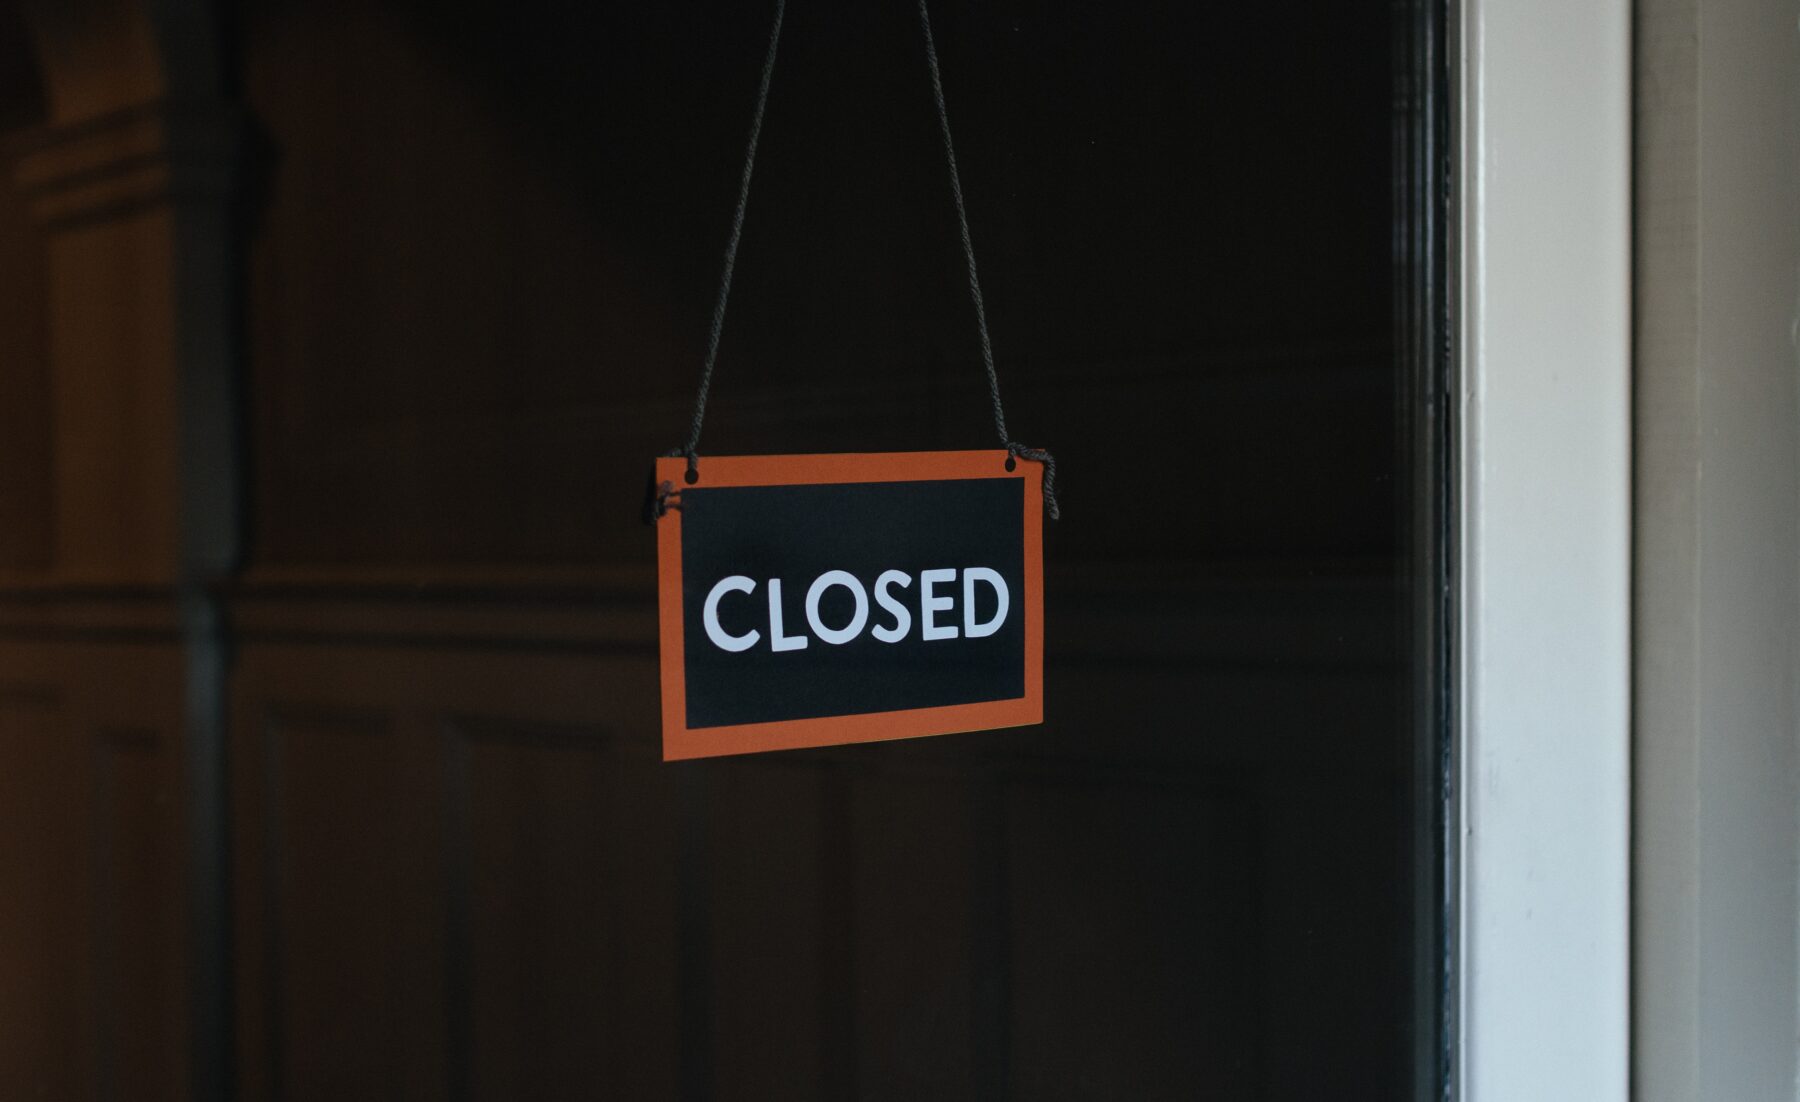 A closed sign is shown against a black background